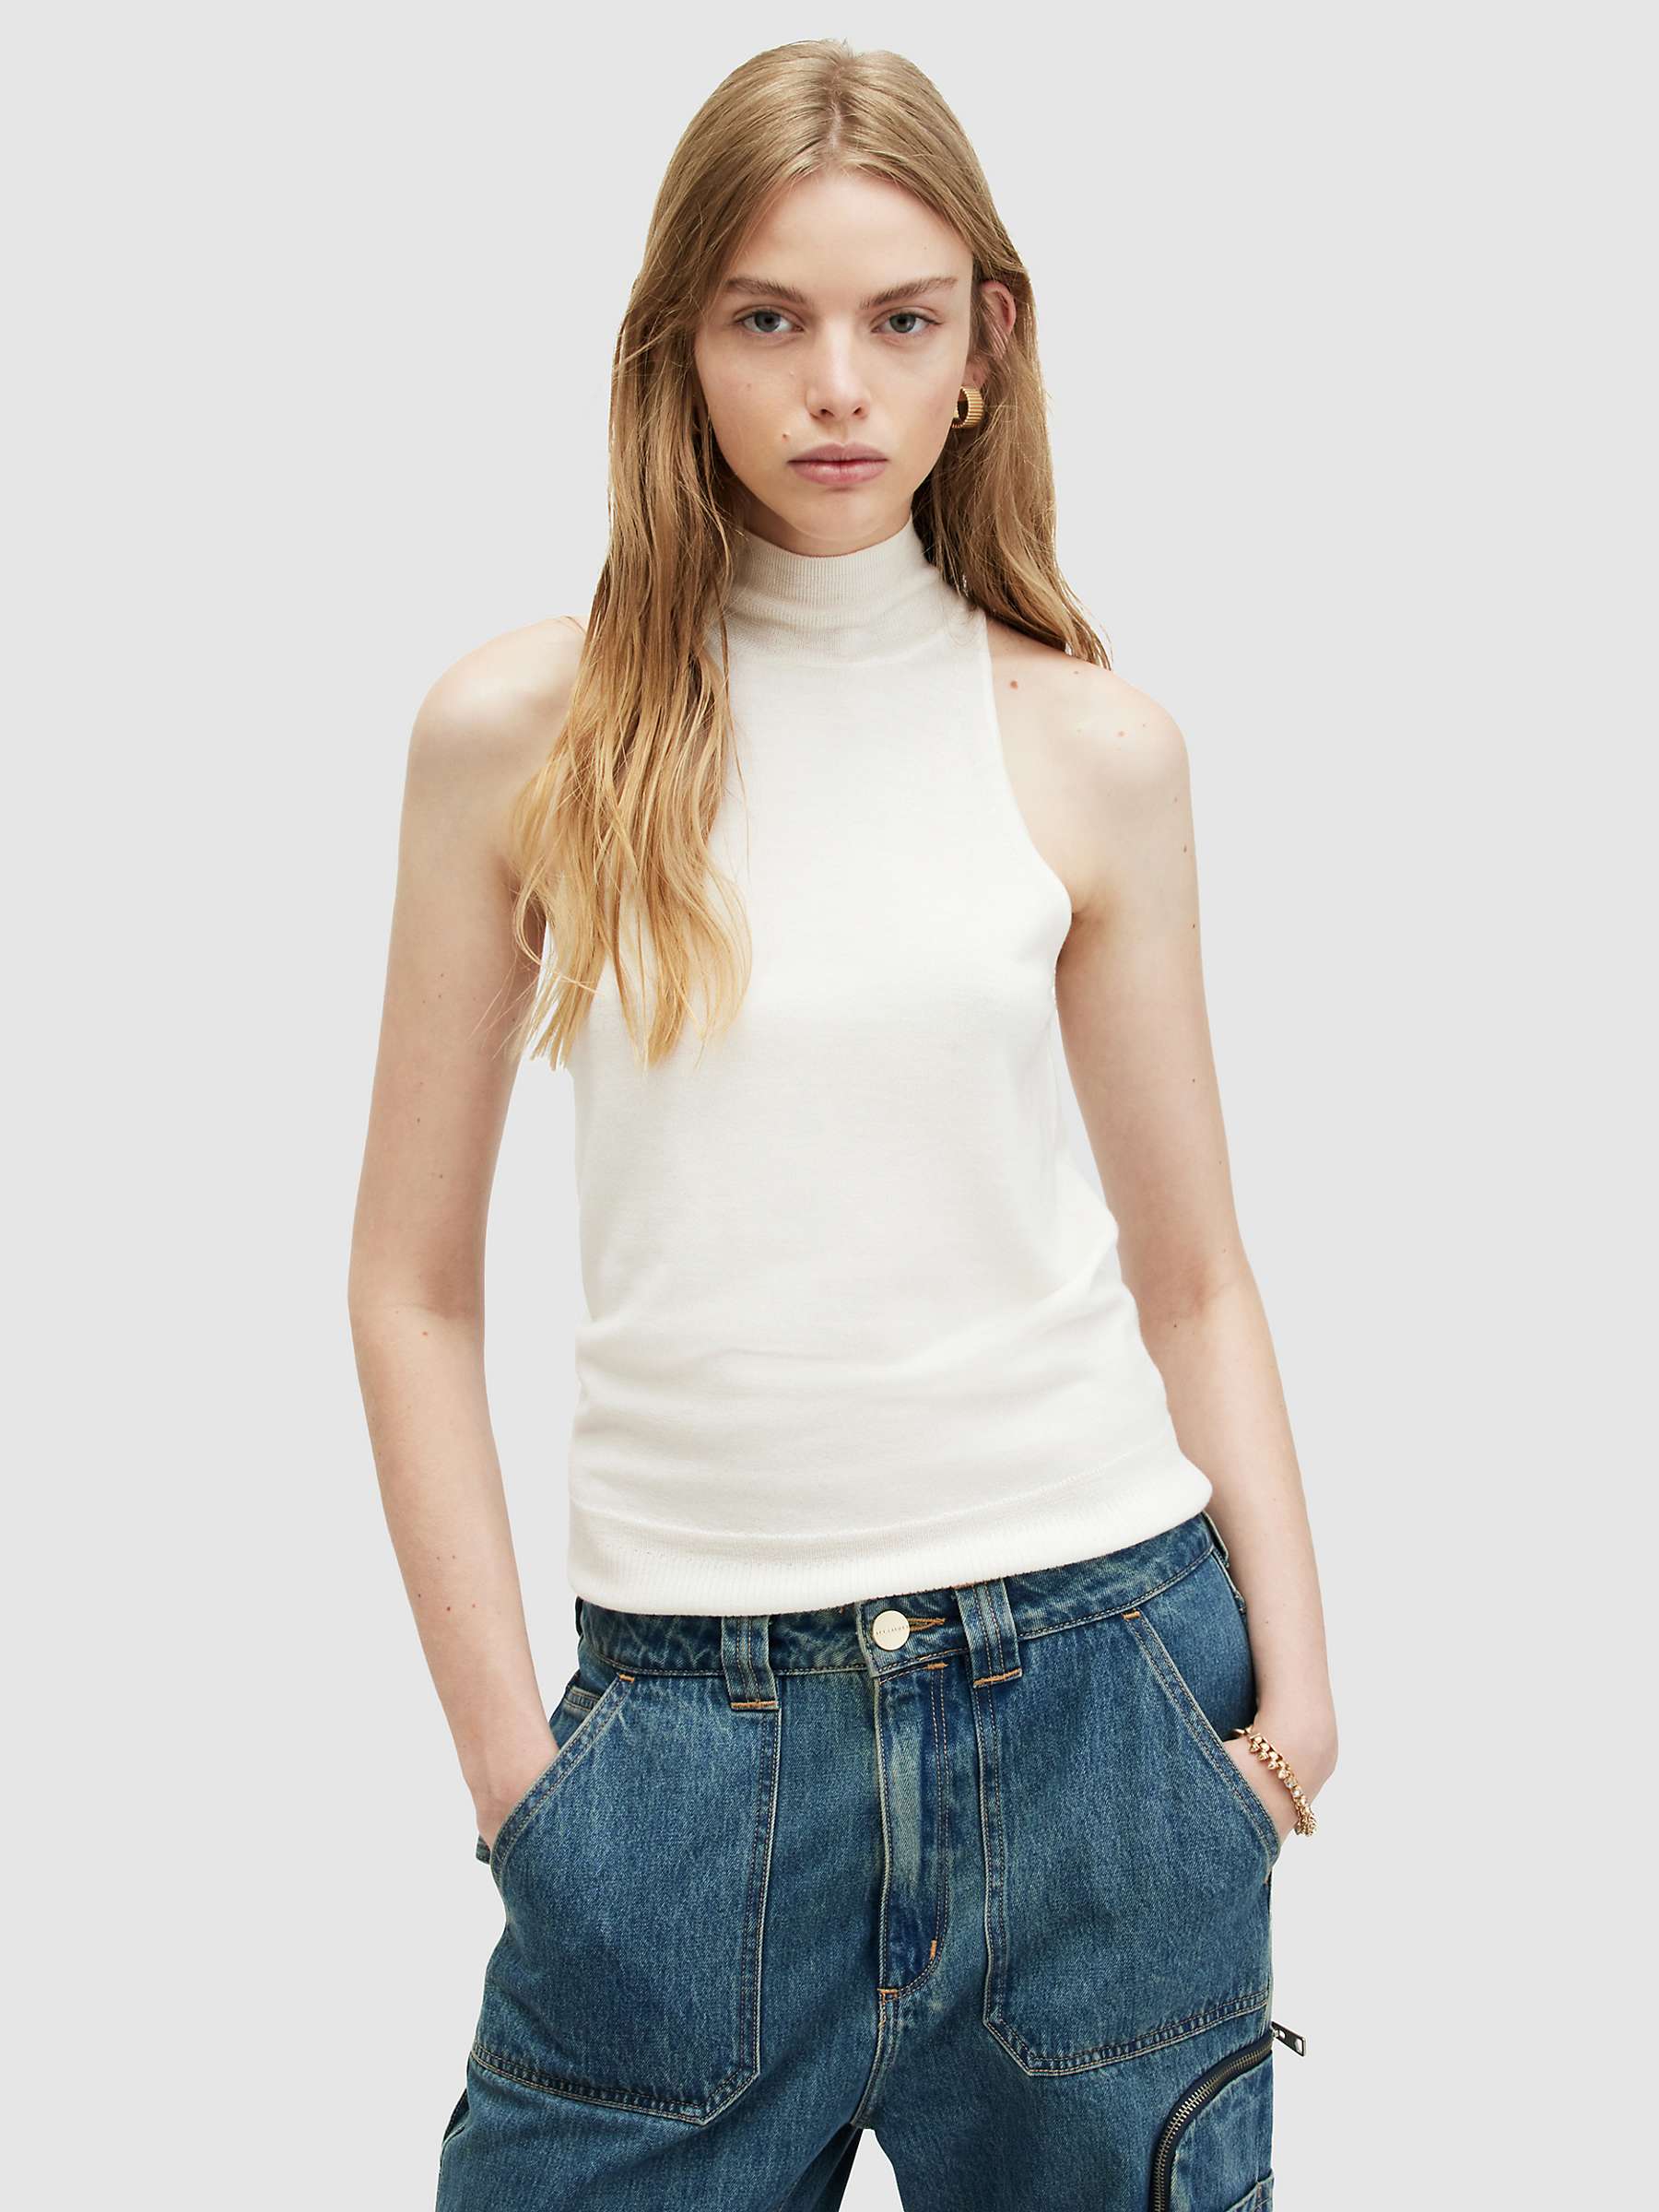 Buy AllSaints Connie Merino Wool Funnel Neck Top Online at johnlewis.com